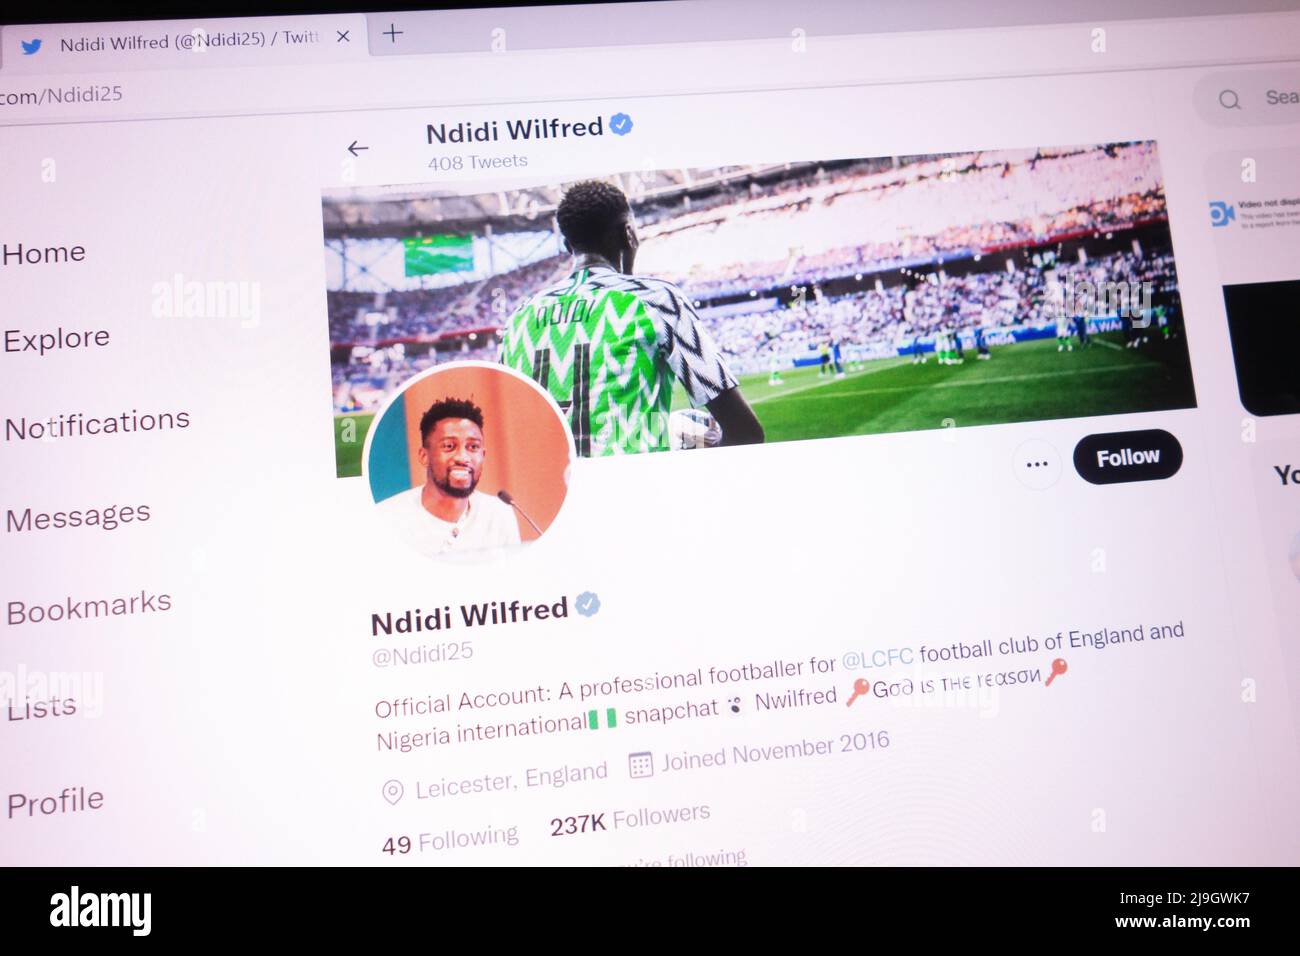 KONSKIE, POLAND - May 21, 2022: Ndidi Wilfred official Twitter account displayed on laptop screen Stock Photo